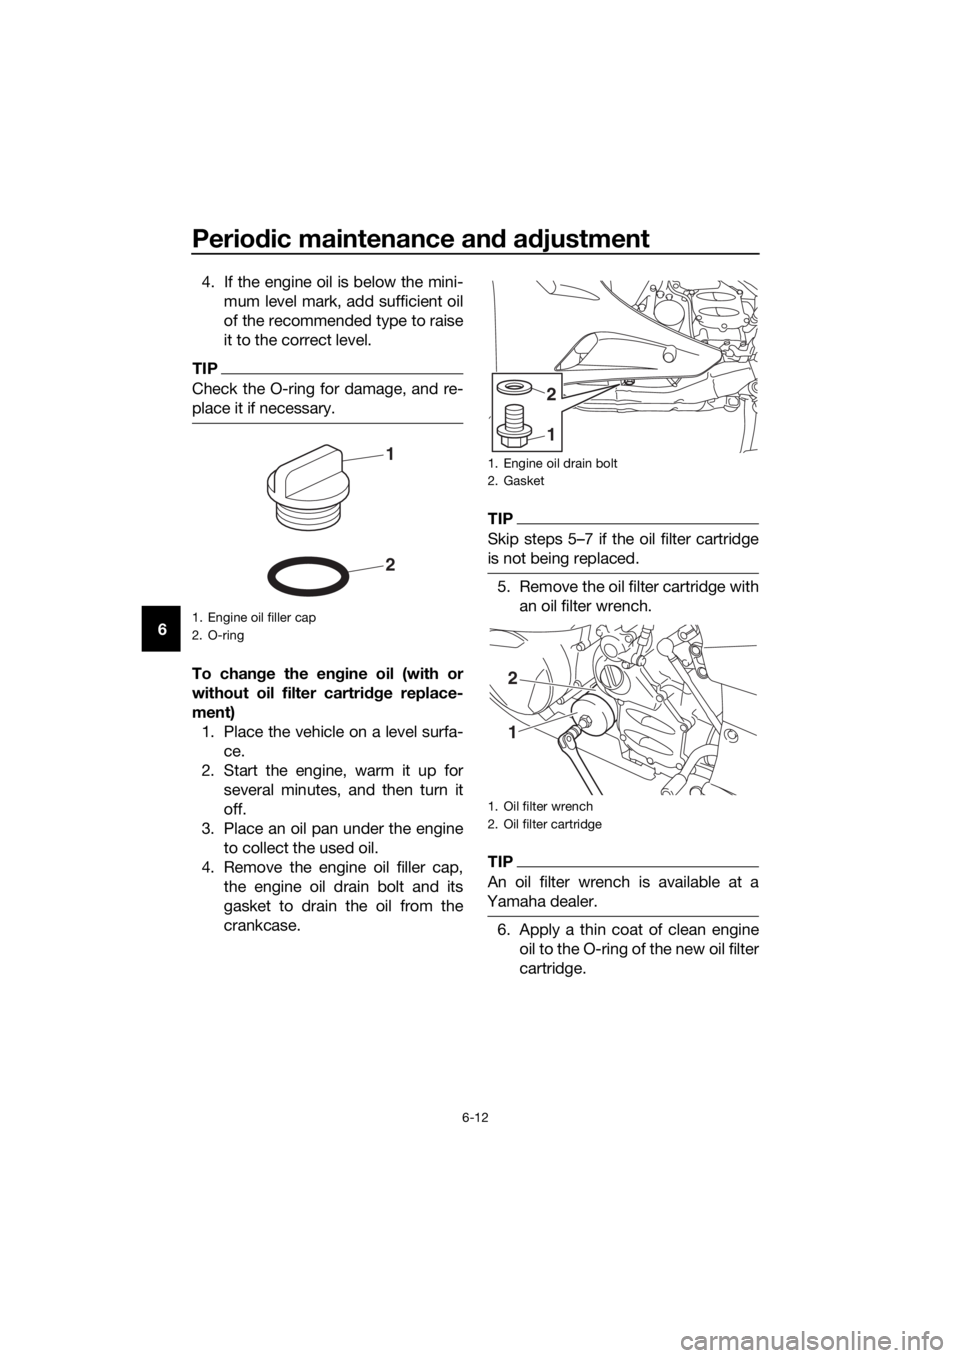 YAMAHA FJR1300AE 2018  Owners Manual Periodic maintenance an d a djustment
6-12
6 4. If the engine oil is below the mini-
mum level mark, add sufficient oil
of the recommended type to raise
it to the correct level.
TIP
Check the O-ring f